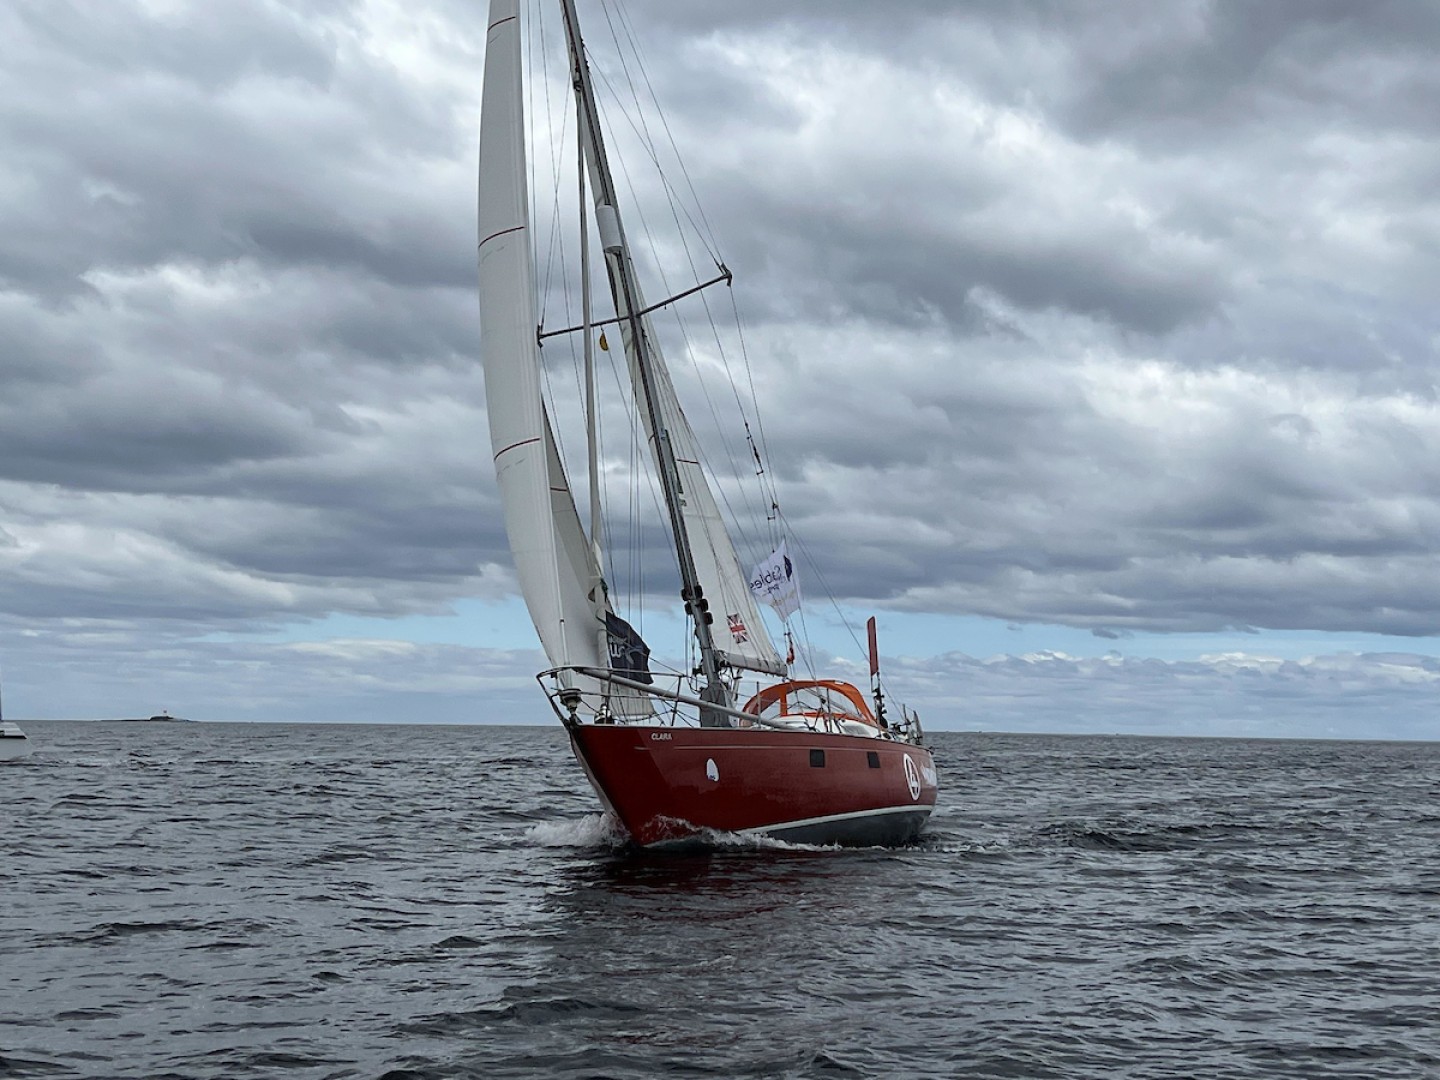 Simon Curwen – Biscay 36 'Clara' - 1200 miles to Cape Horn as first gales sweep across. Picture Credit: DD & JJ